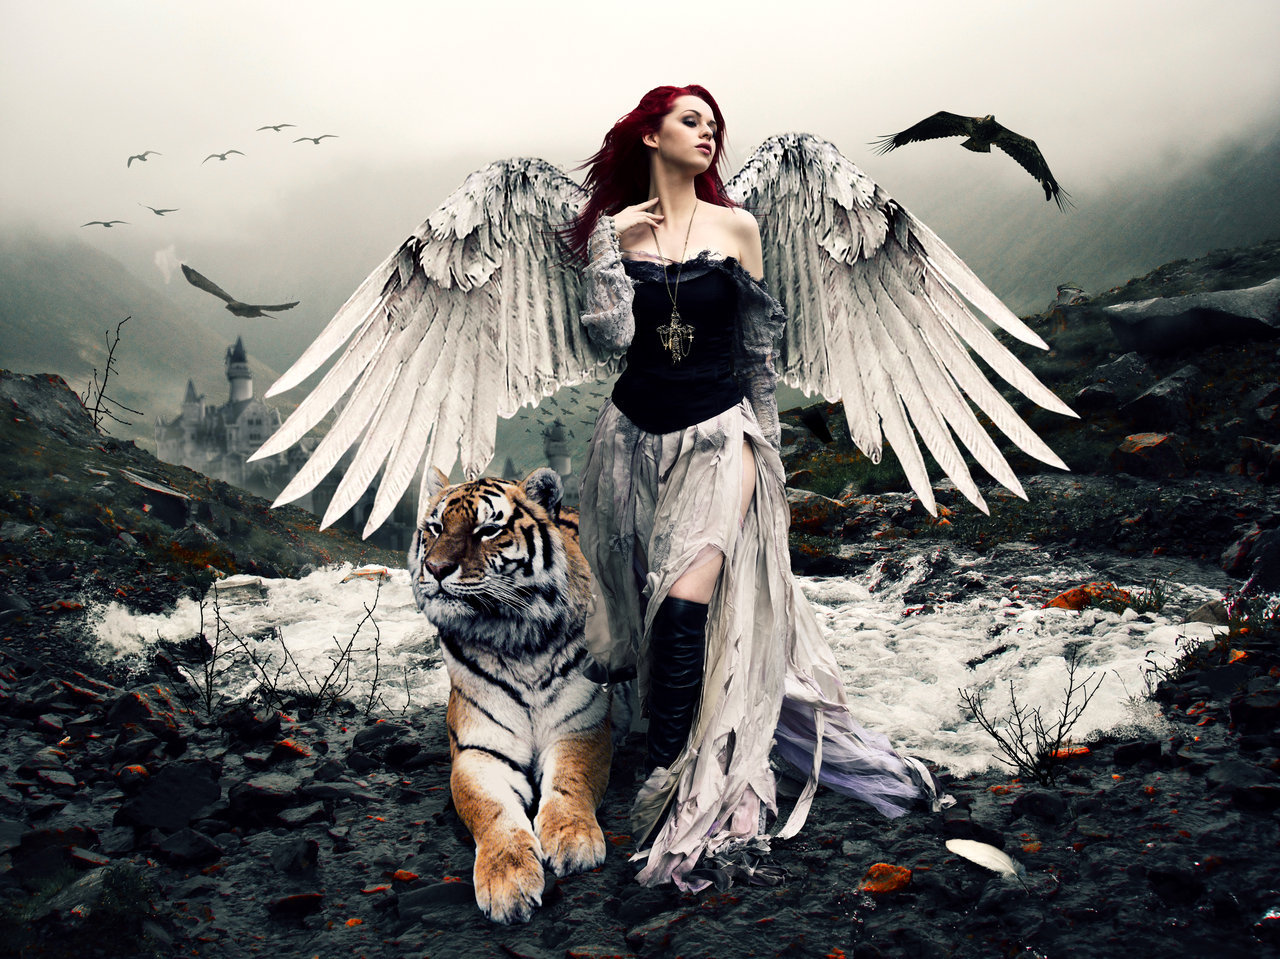 android tigers, angels, animals, girls, fantasy, people